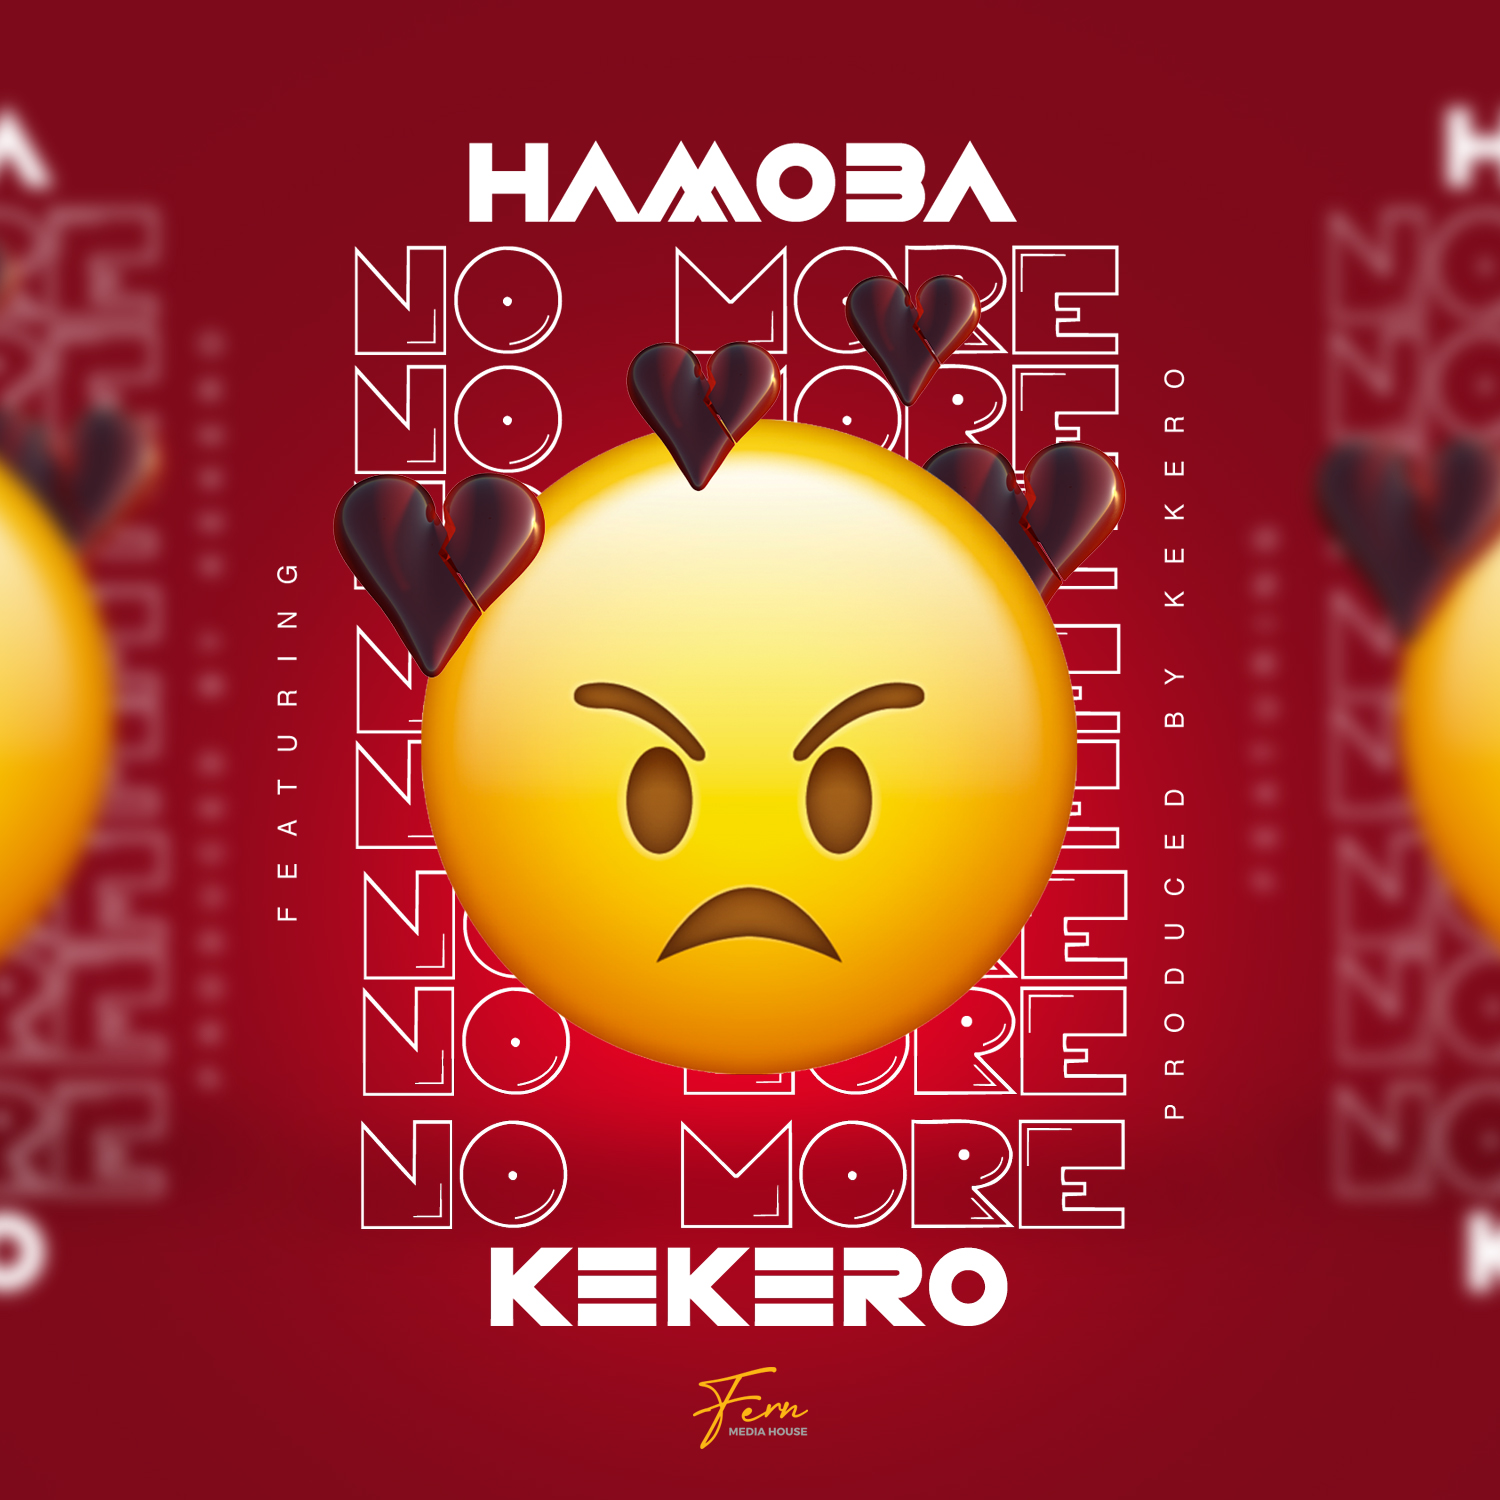 Seasonal legendary musician Hamoba and Recording producer Kekero, link up to come with a thriving jam titled No More.